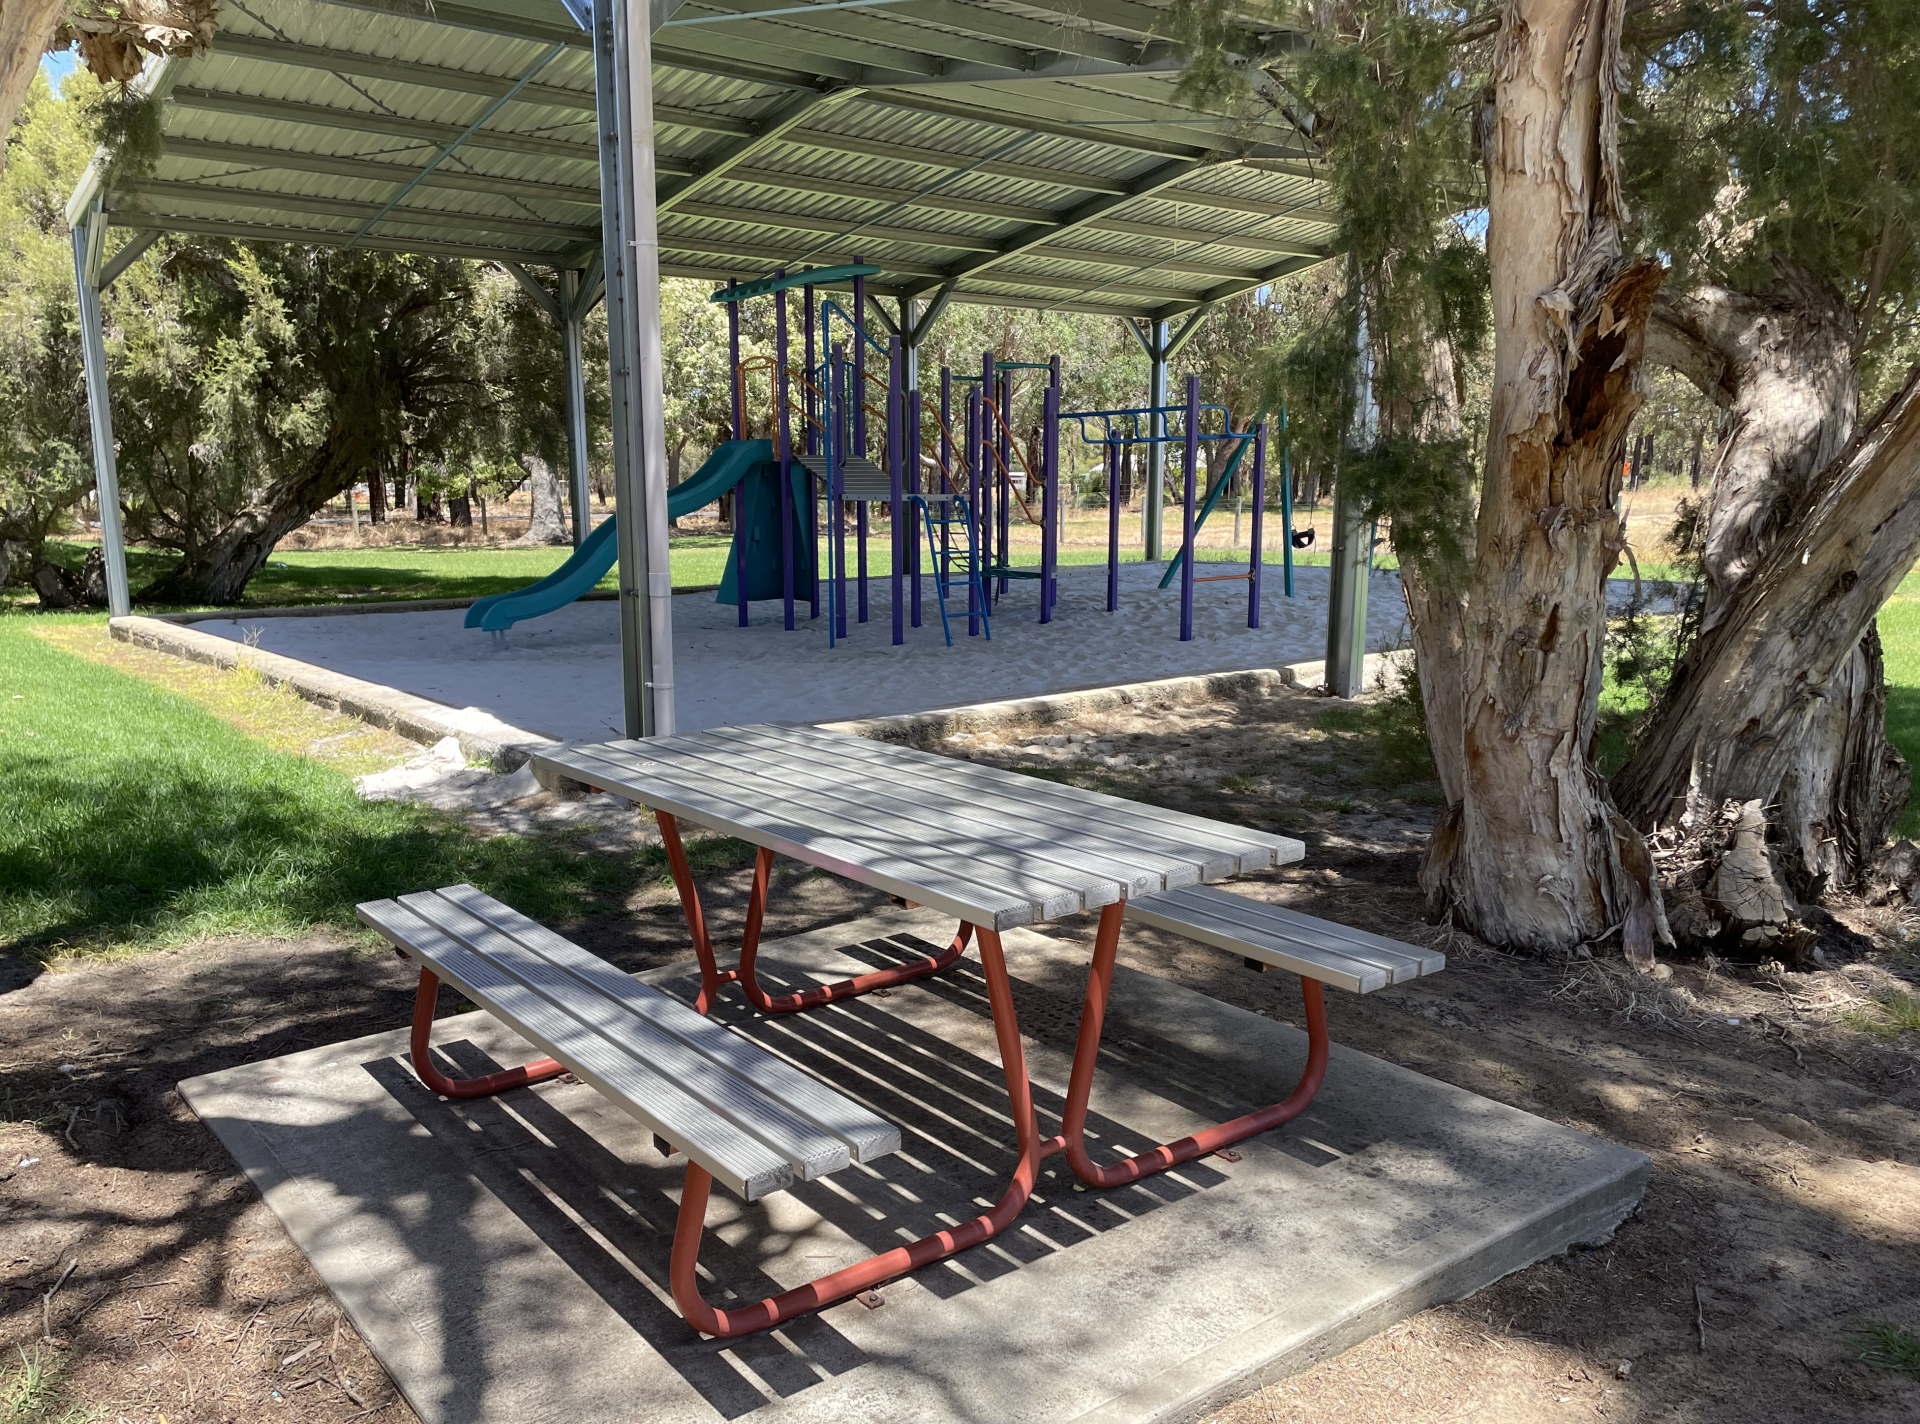 Cookernup-Hall-Outside-Picnic-Bench-Playground.jpg